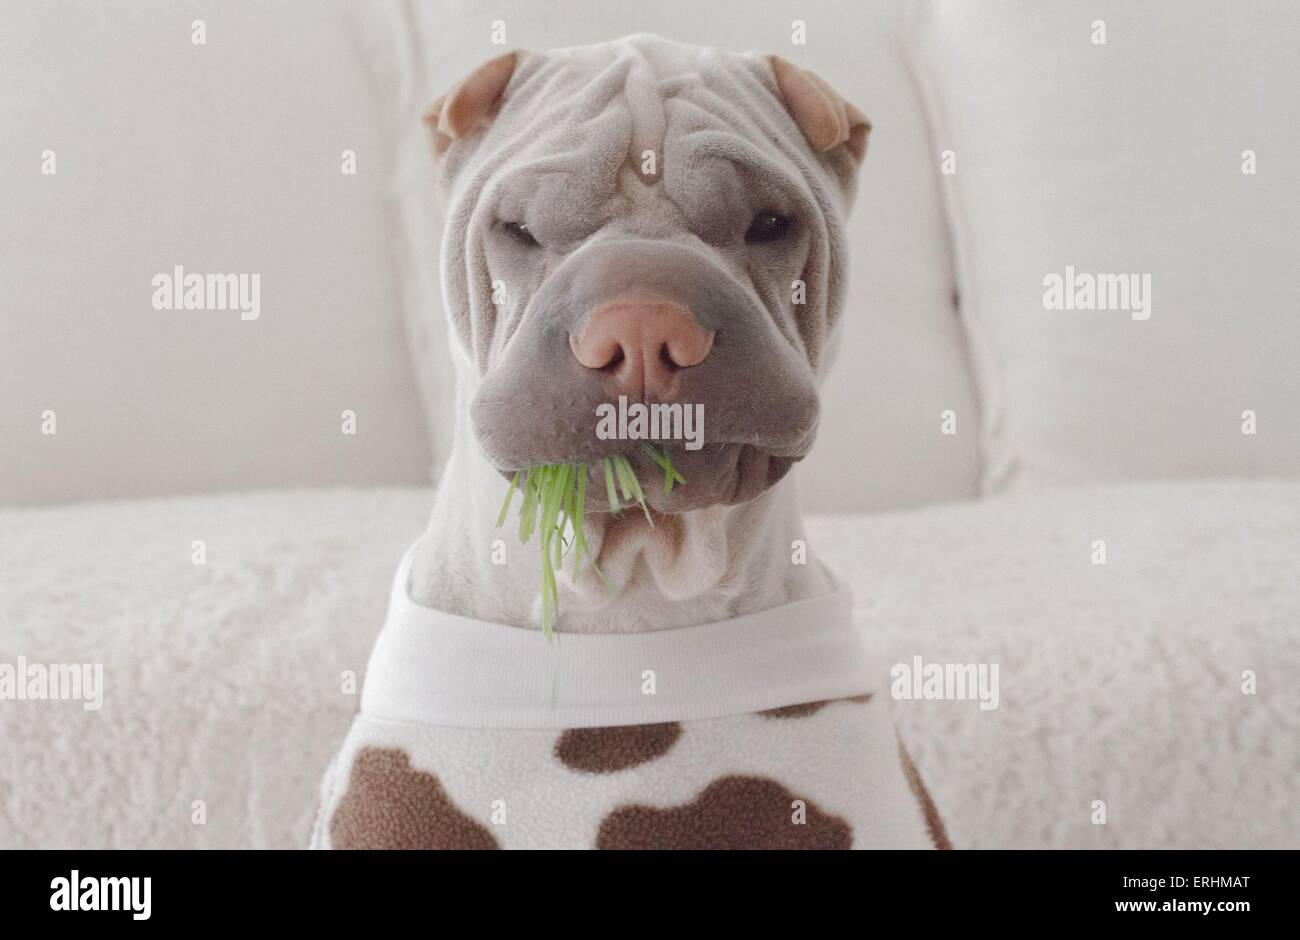 Sharpei dog dressed as a cow Stock Photo